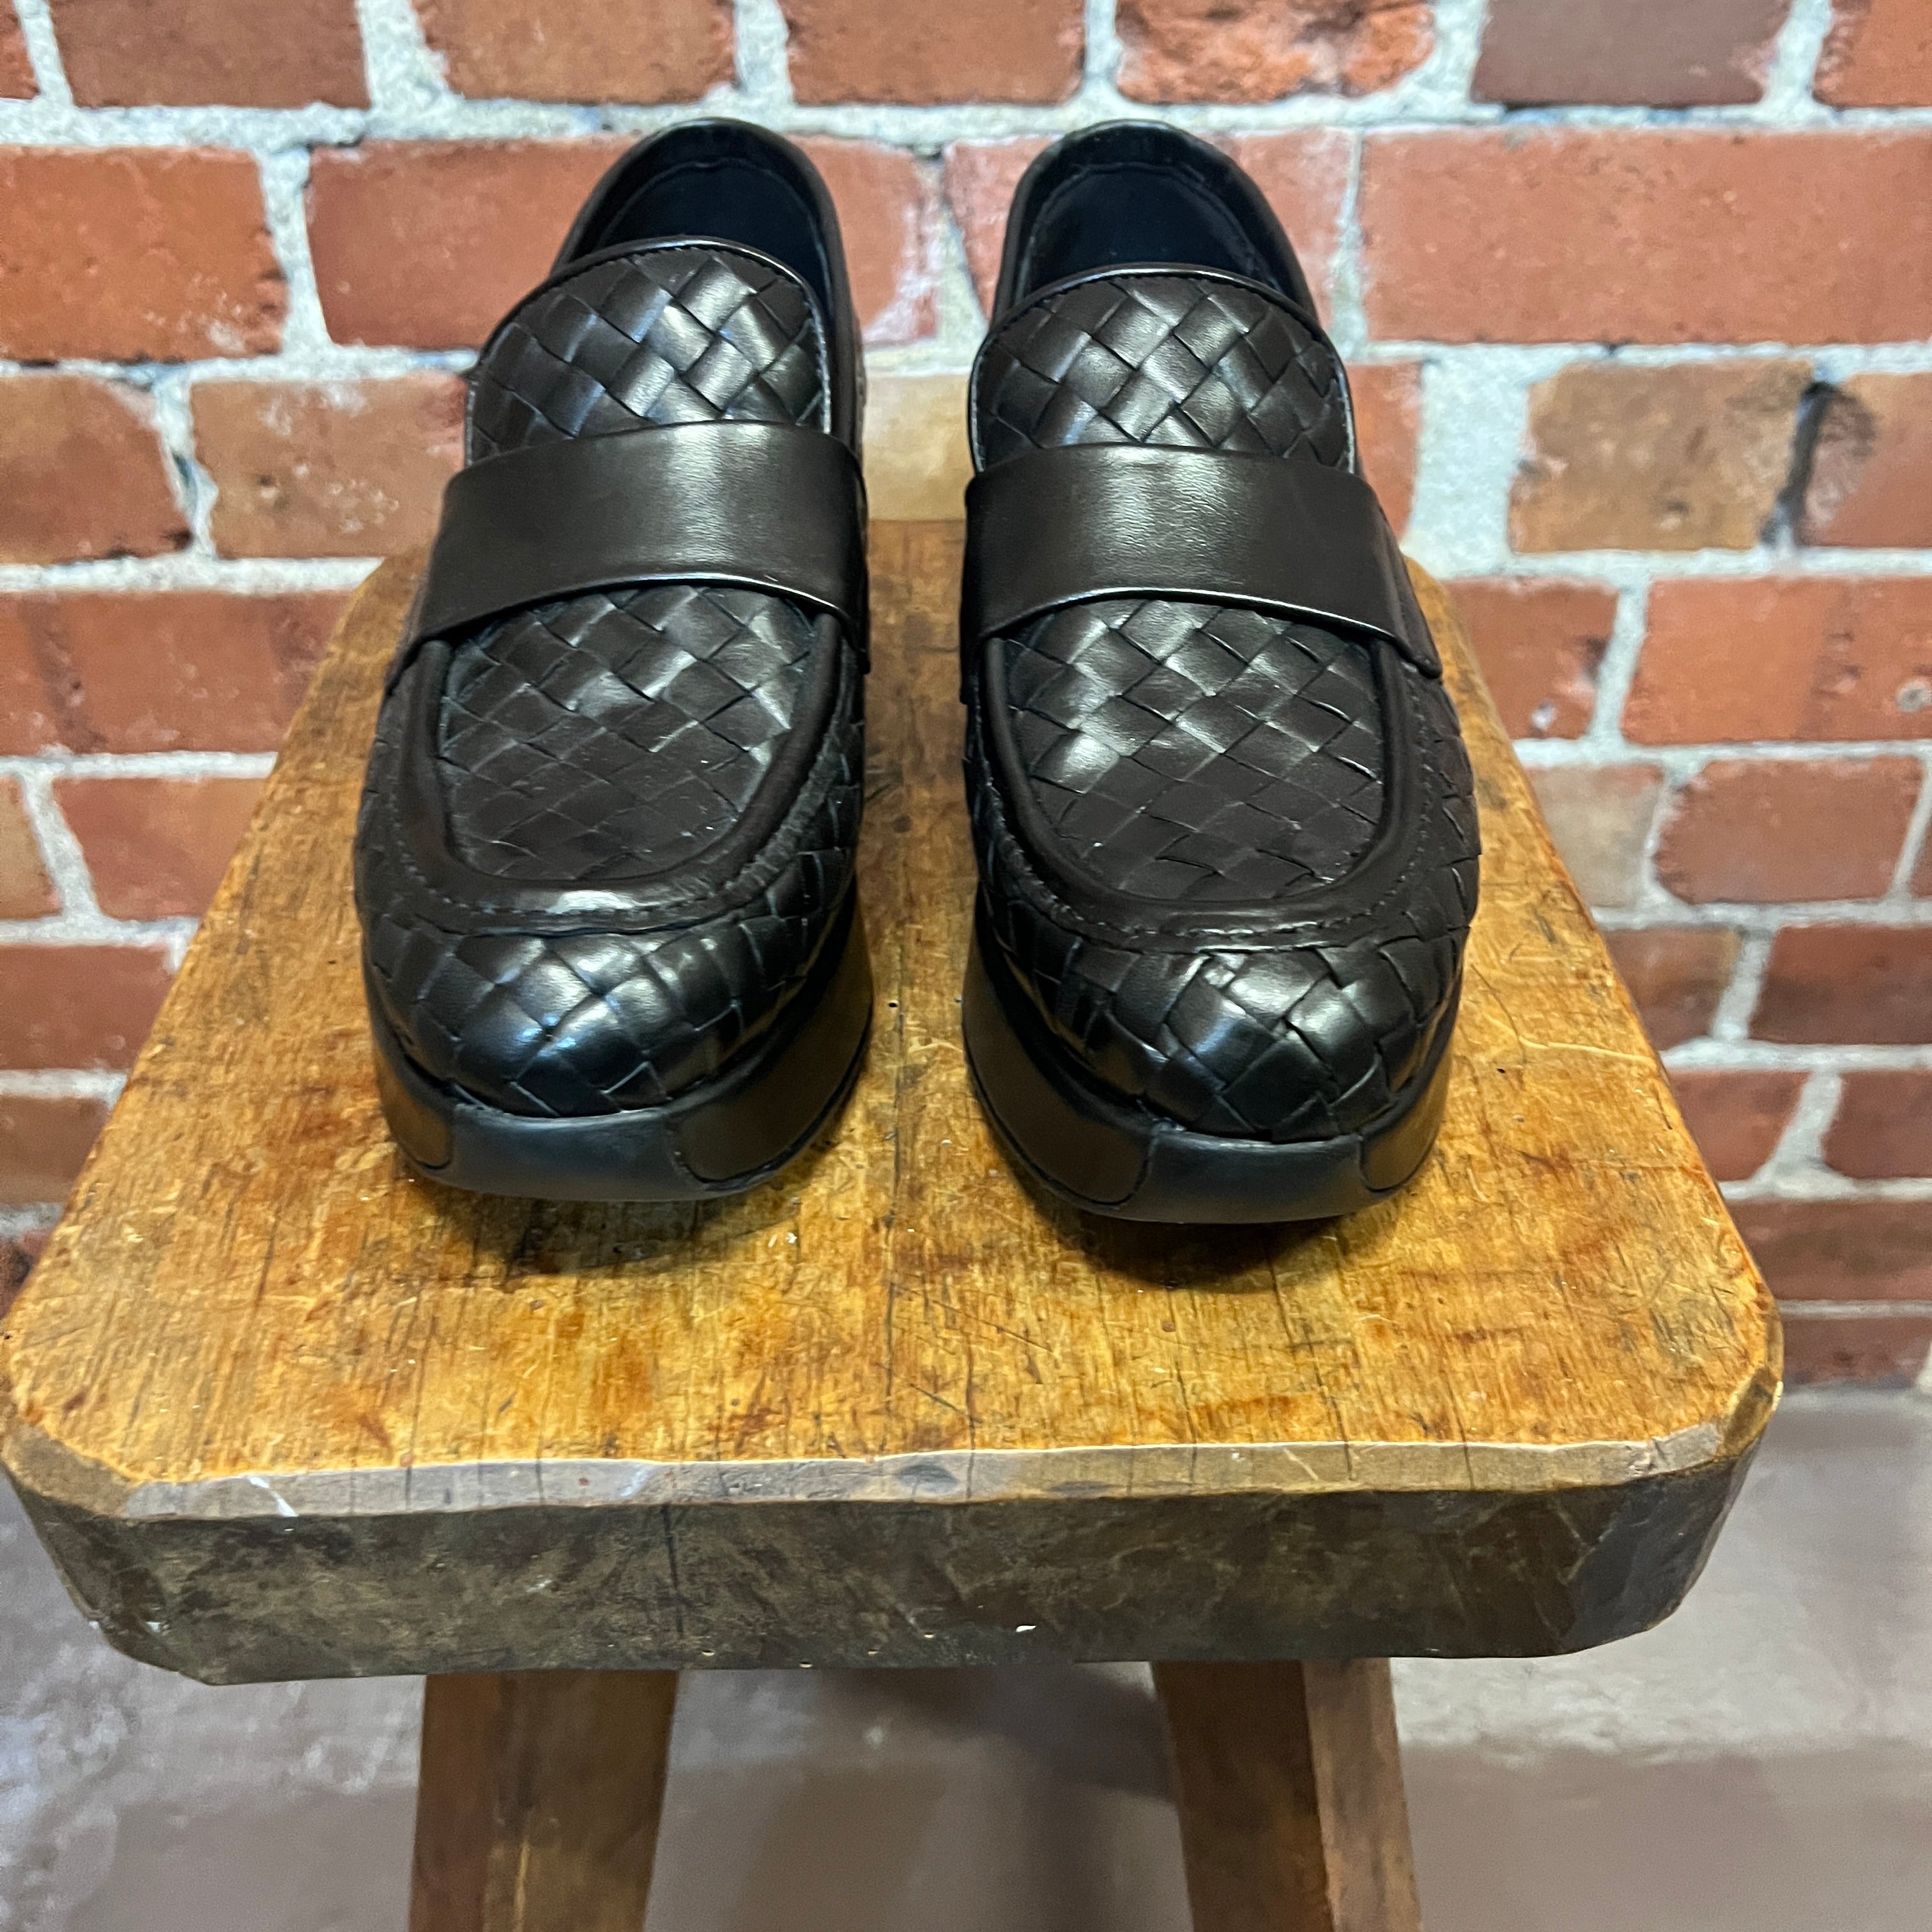 PONS QUINTANA Woven leather loafers 38